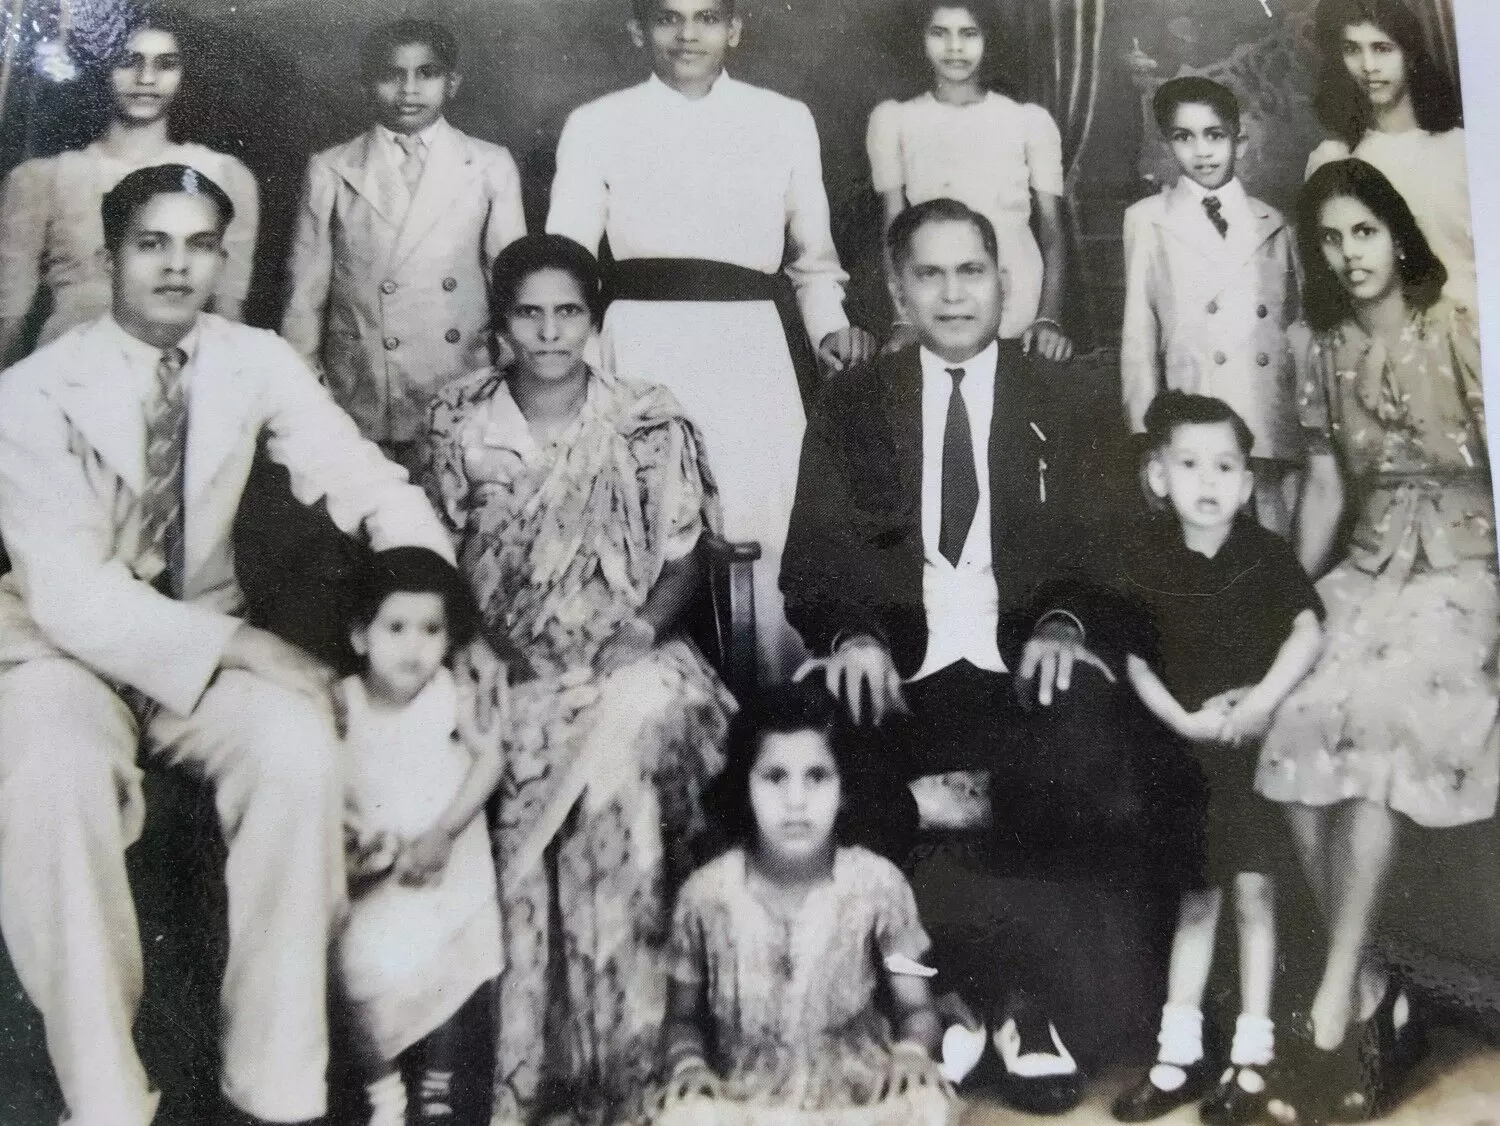 Mary DSouzas (standing, third from right) family of 12